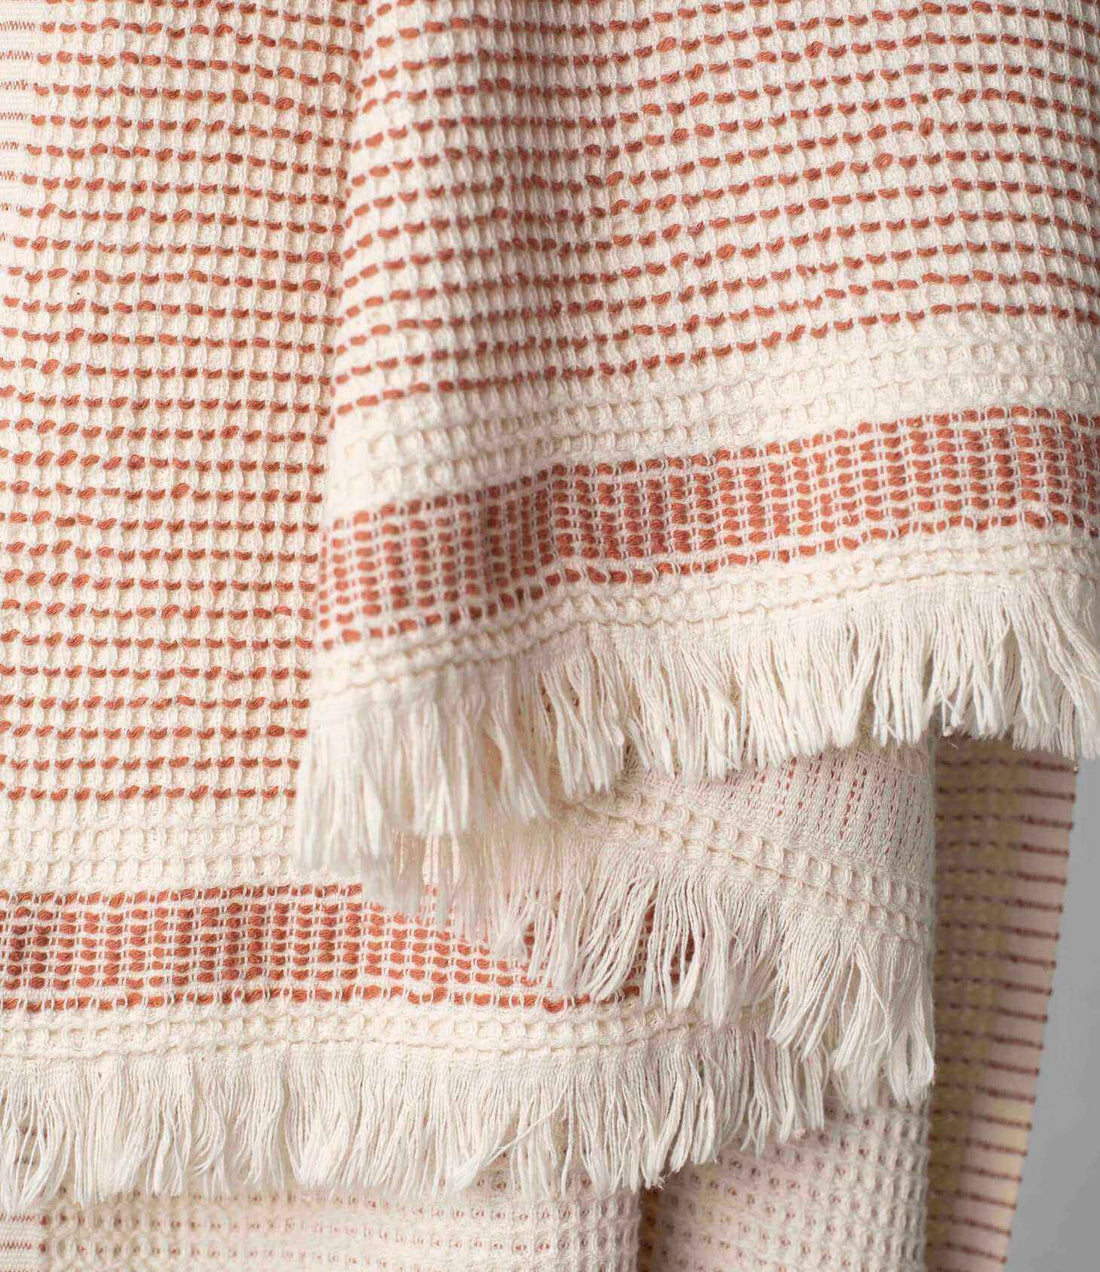 A dotted Turkish cotton "Kalkan" beach towel in copper red